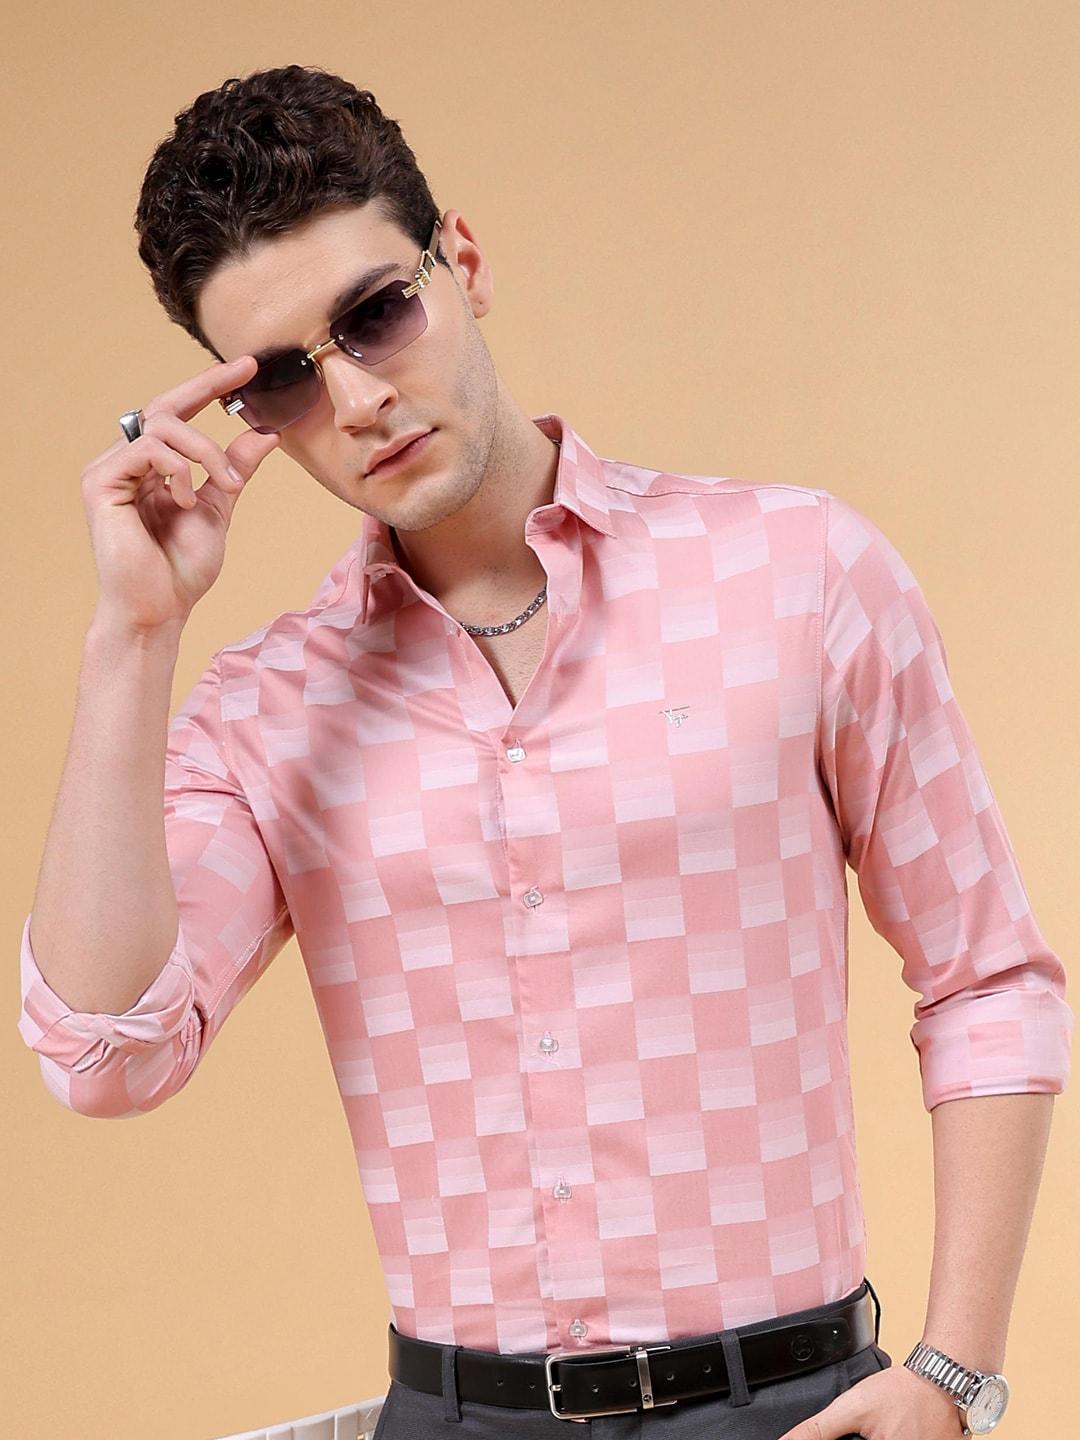 The Indian Garage Co Slim Fit Buffalo Checked Spread Collar Cotton Casual Shirt